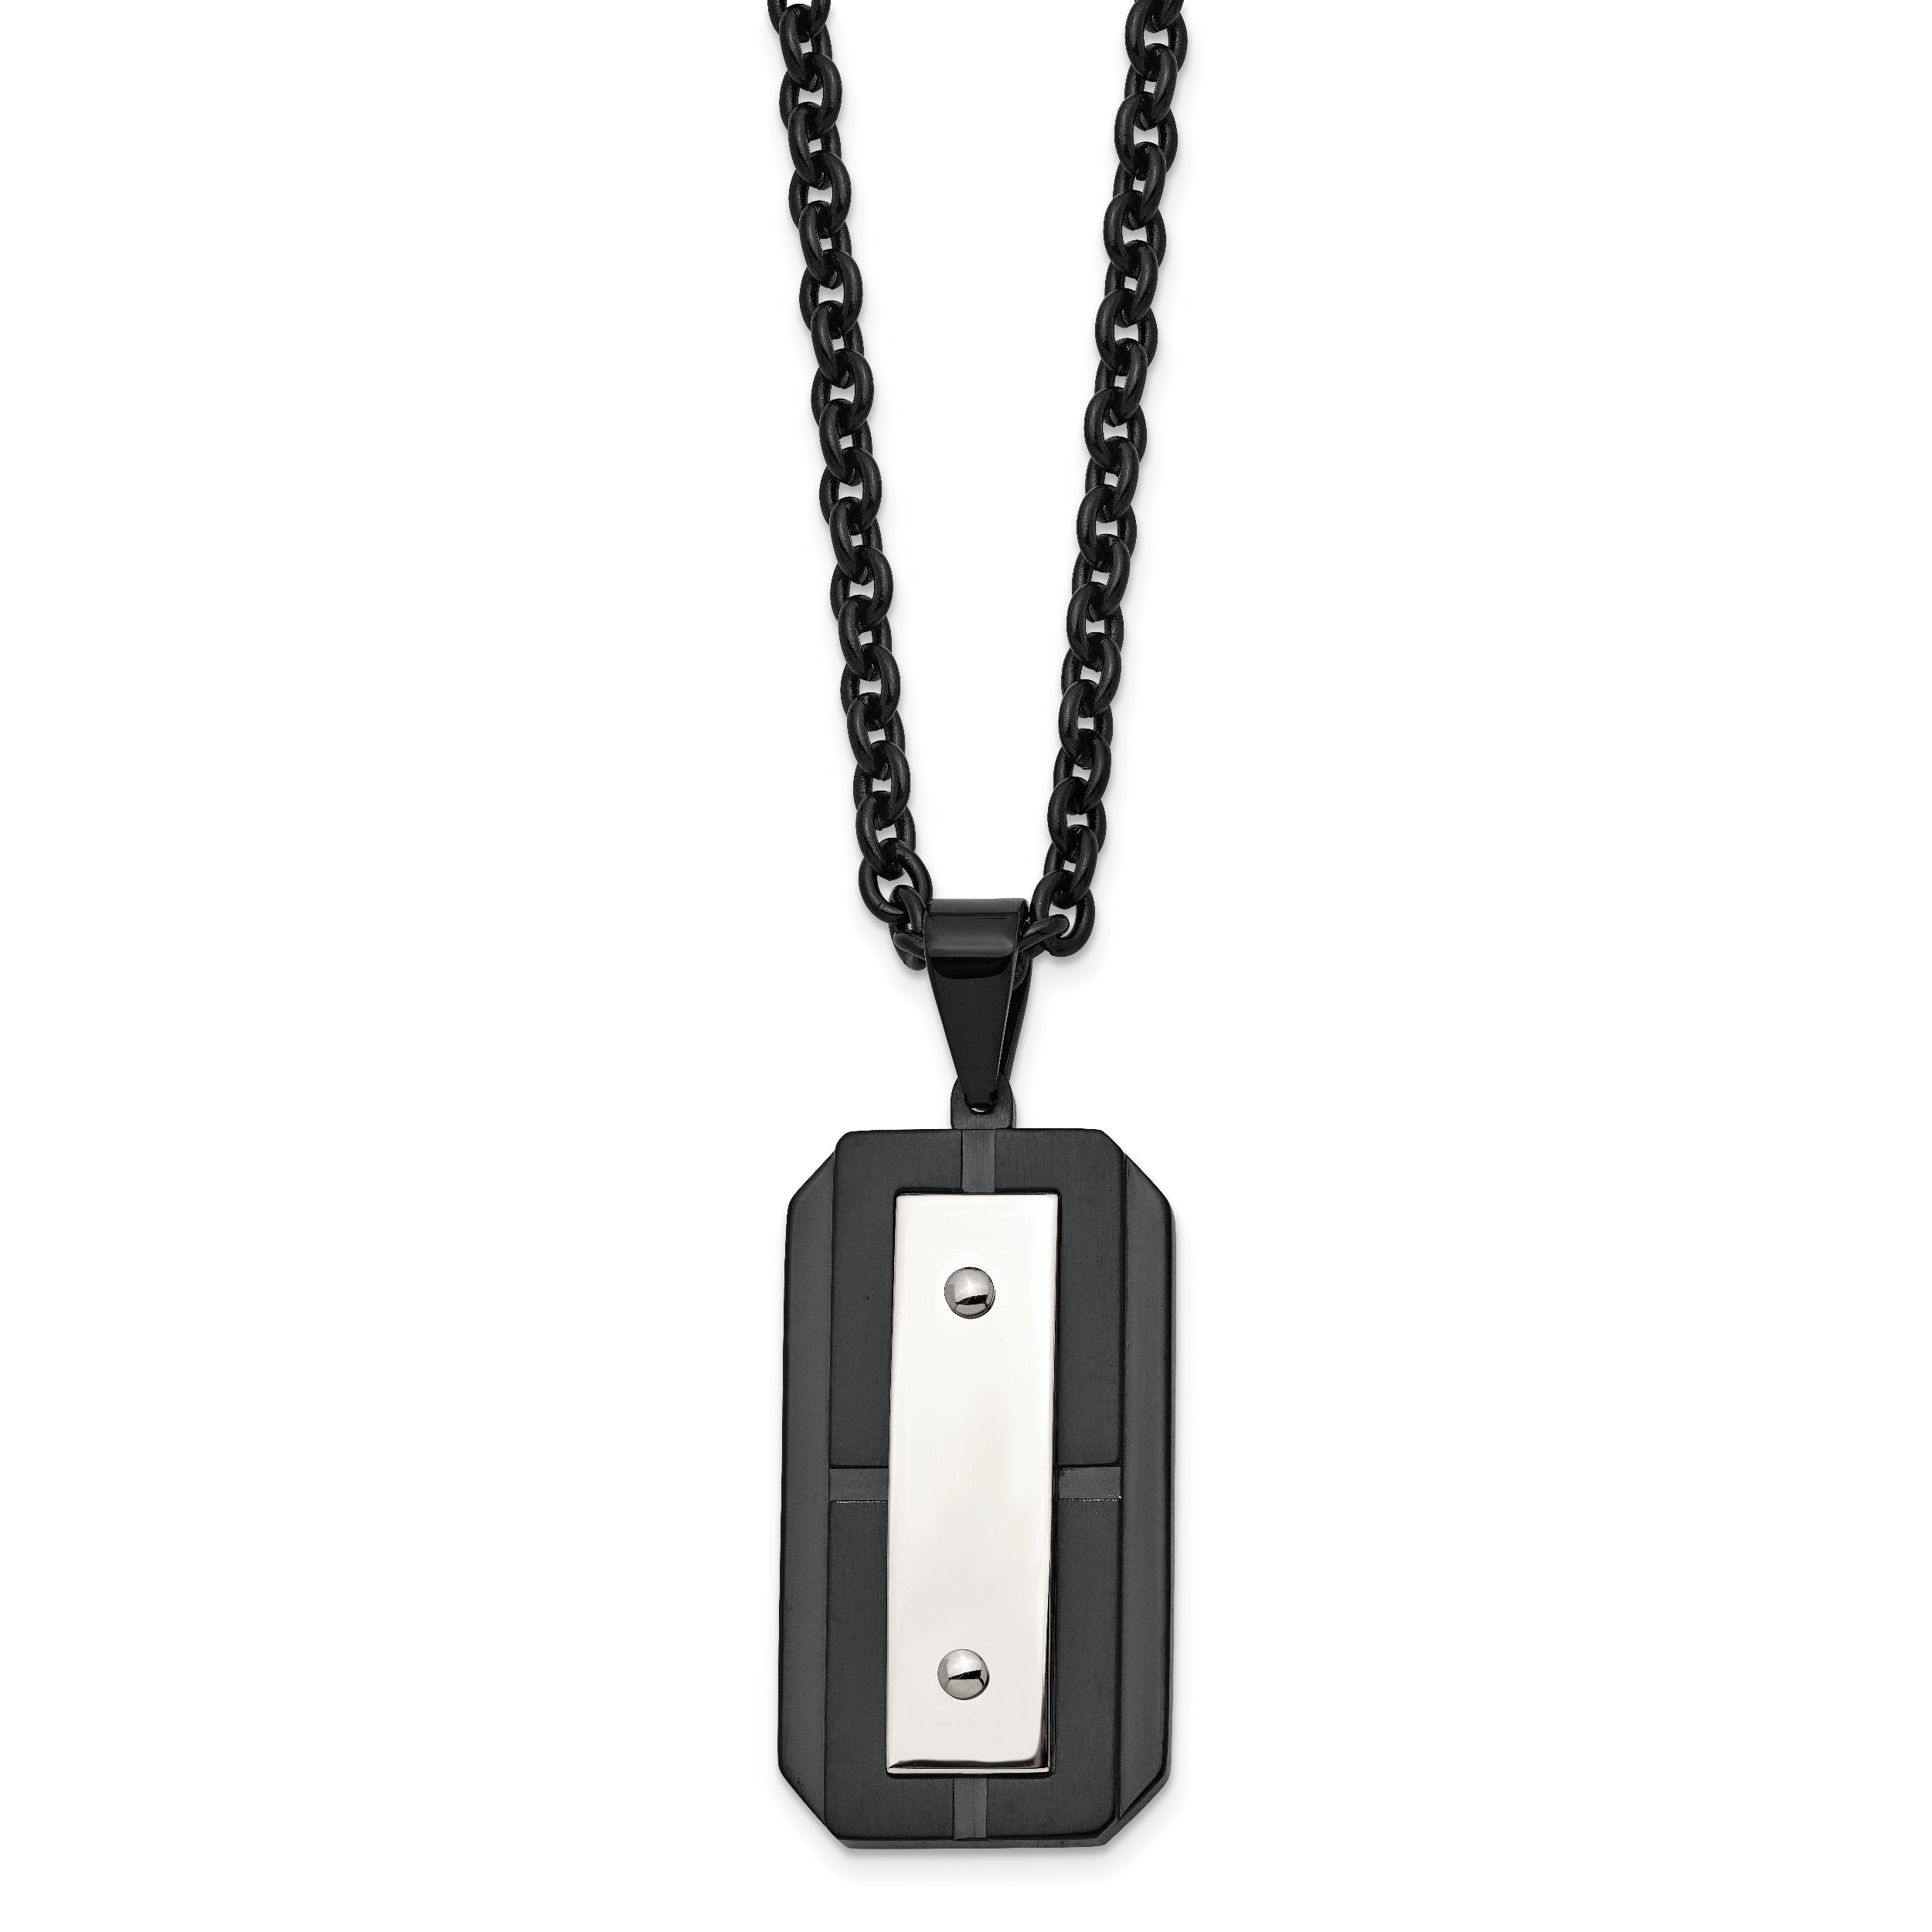 Chisel Stainless Steel Brushed and Polished Black IP-plated Dog Tag on a 24 inch Cable Chain Necklace